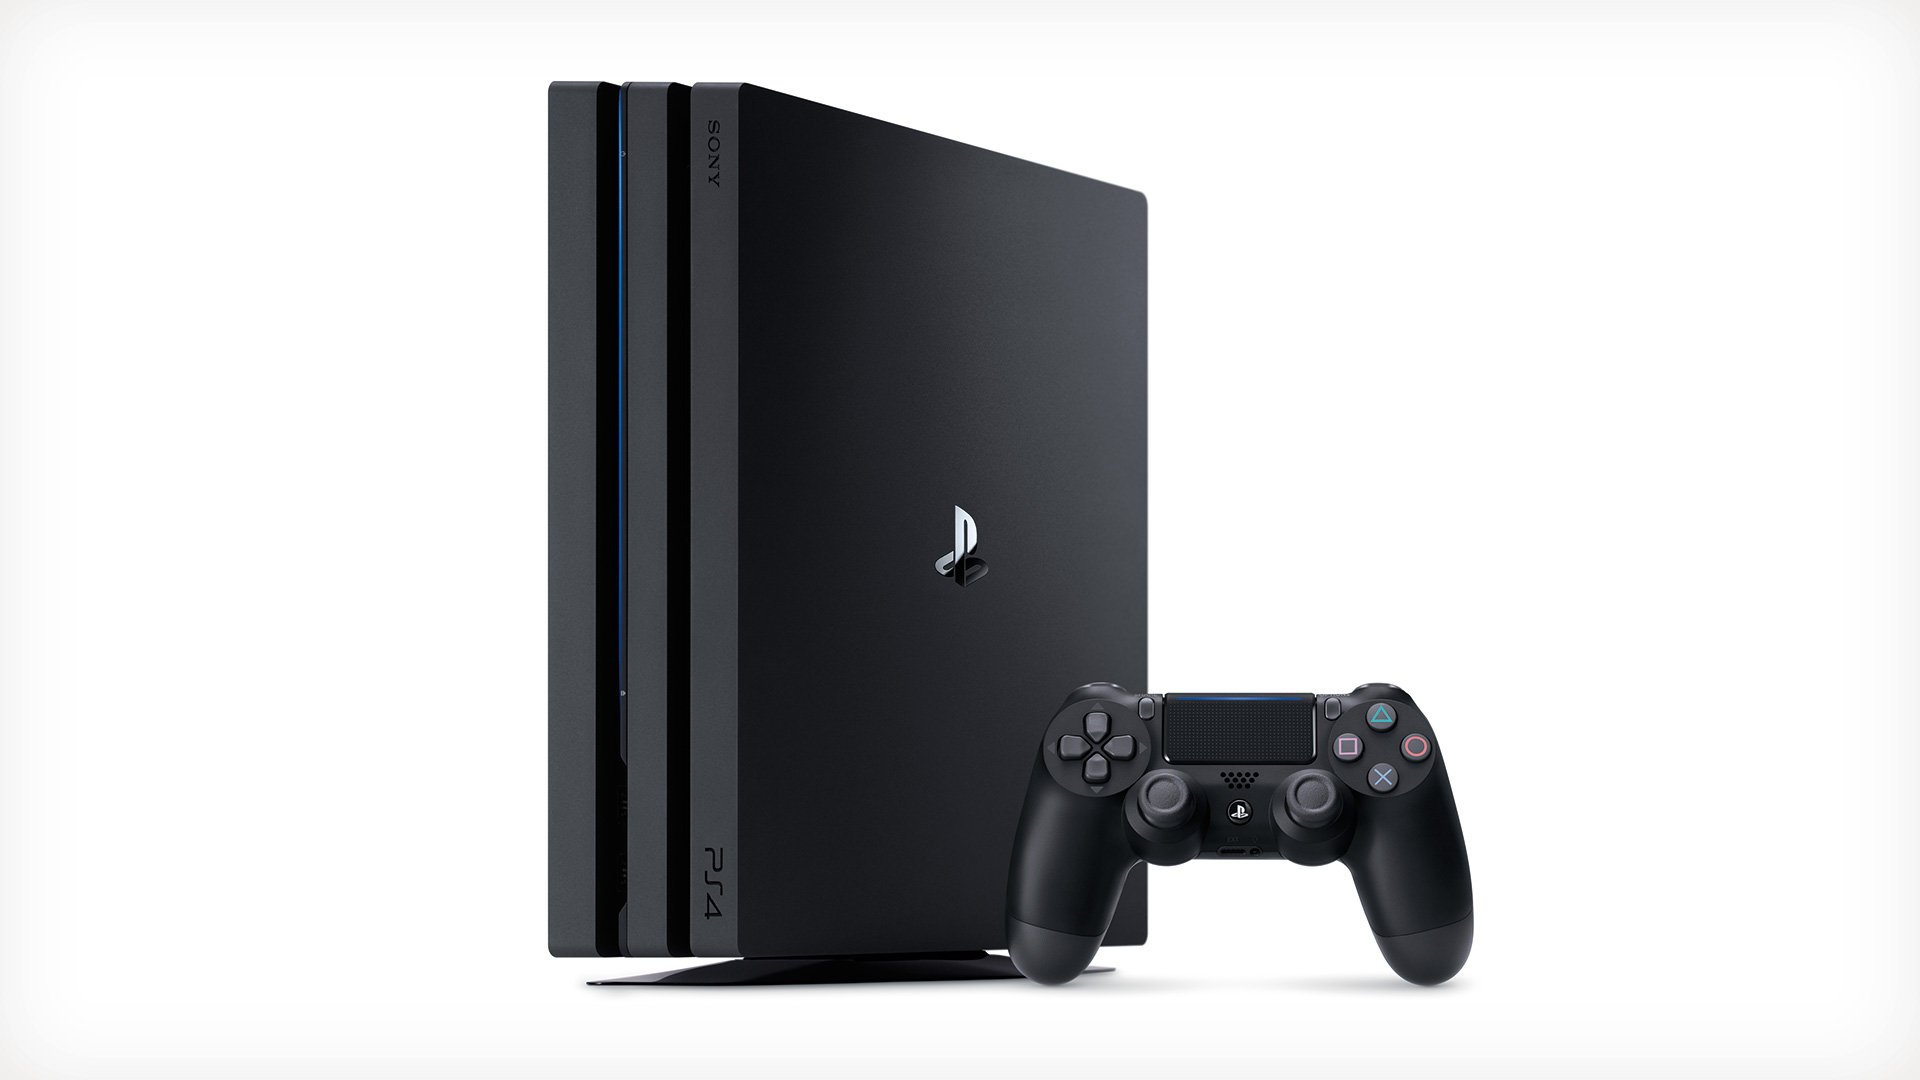 Sony's 4K game console is called PlayStation 4 Pro